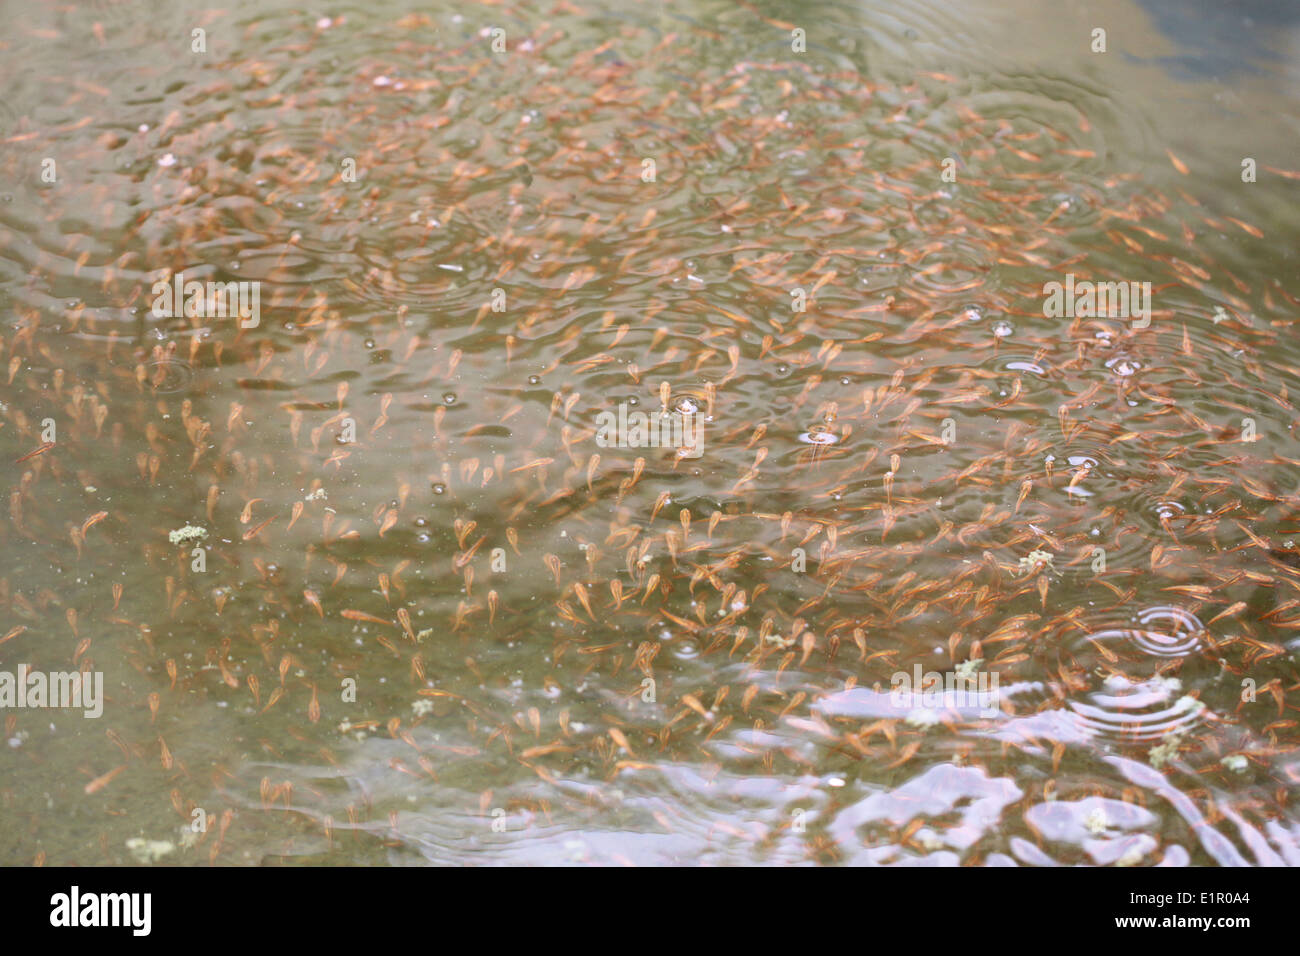 Group of snake head fish in the water. Stock Photo